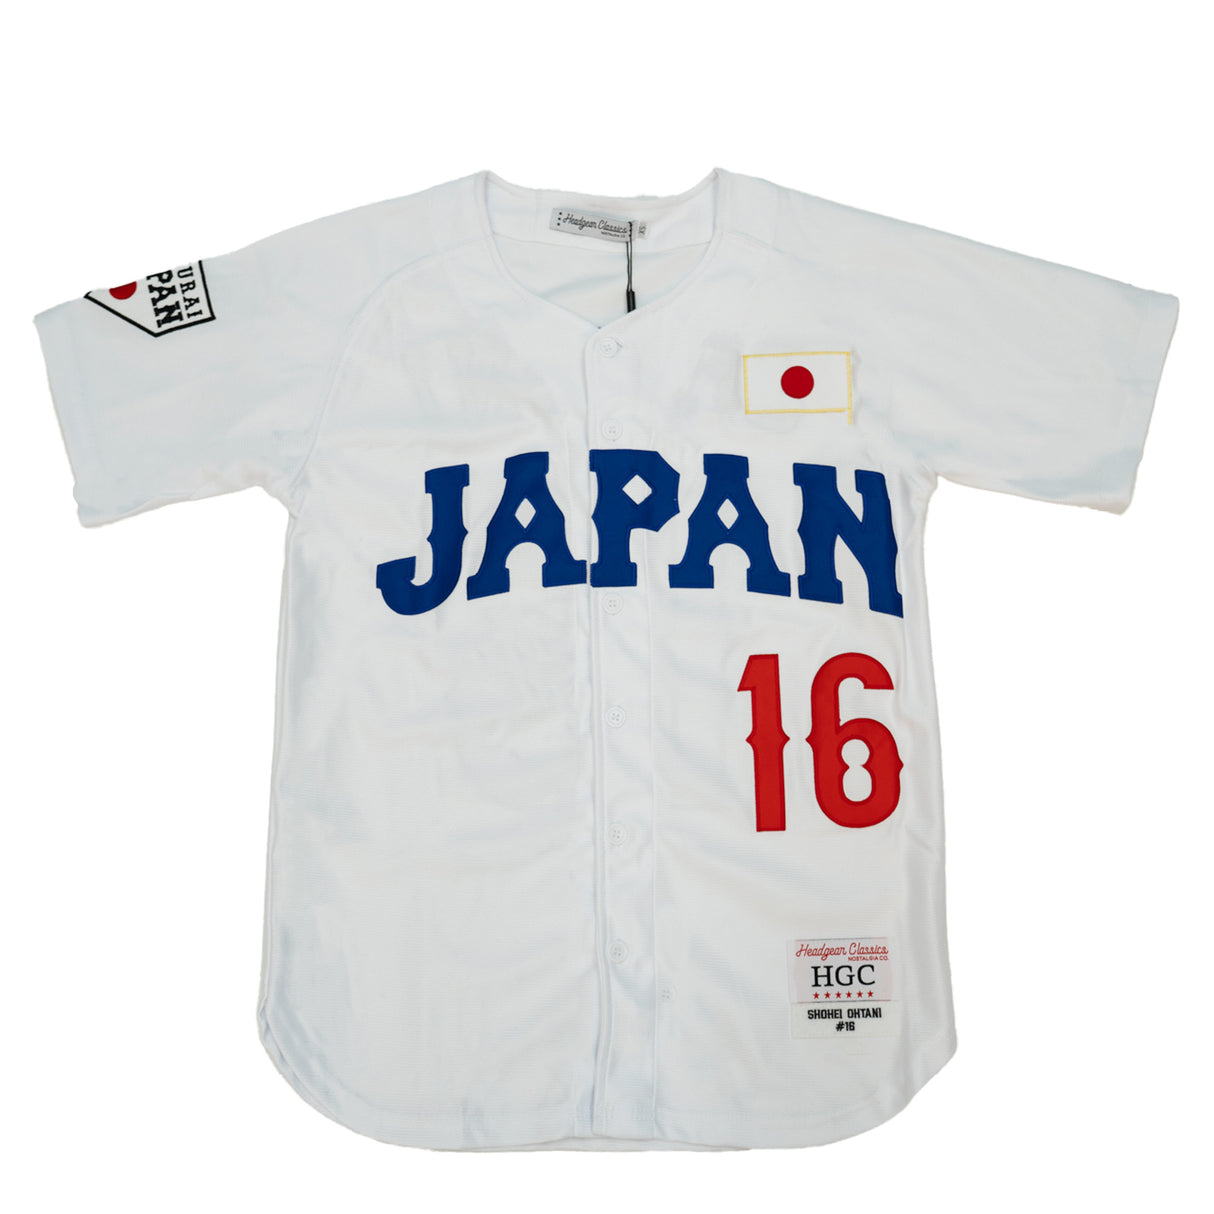 LOS ANGELES JAPAN OHTANI BUTTON DOWN JERSEY (WHITE)